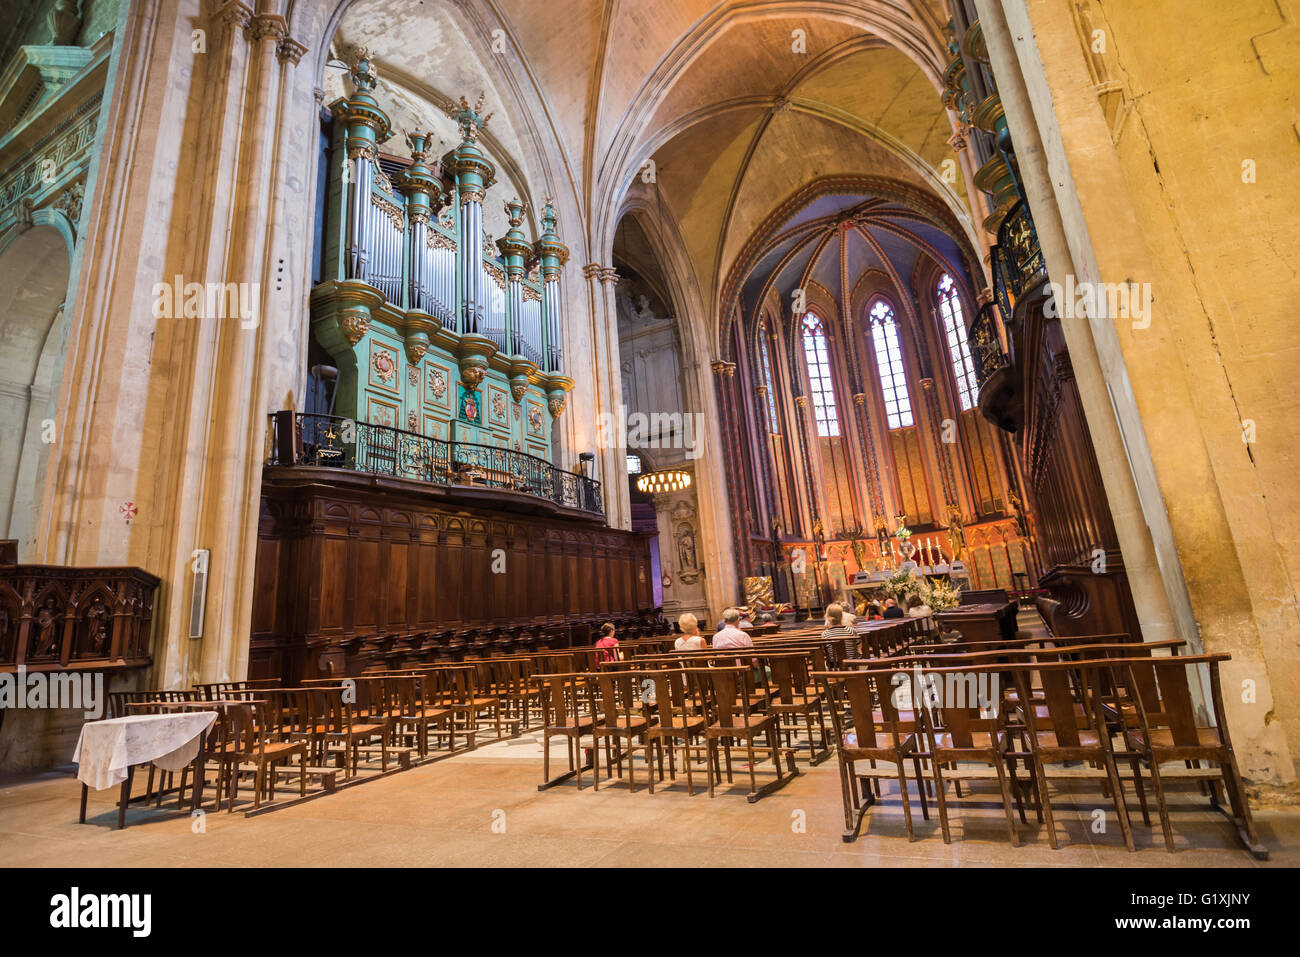 An impressive appeased interior of an ancient medieval cathedral Stock Photo